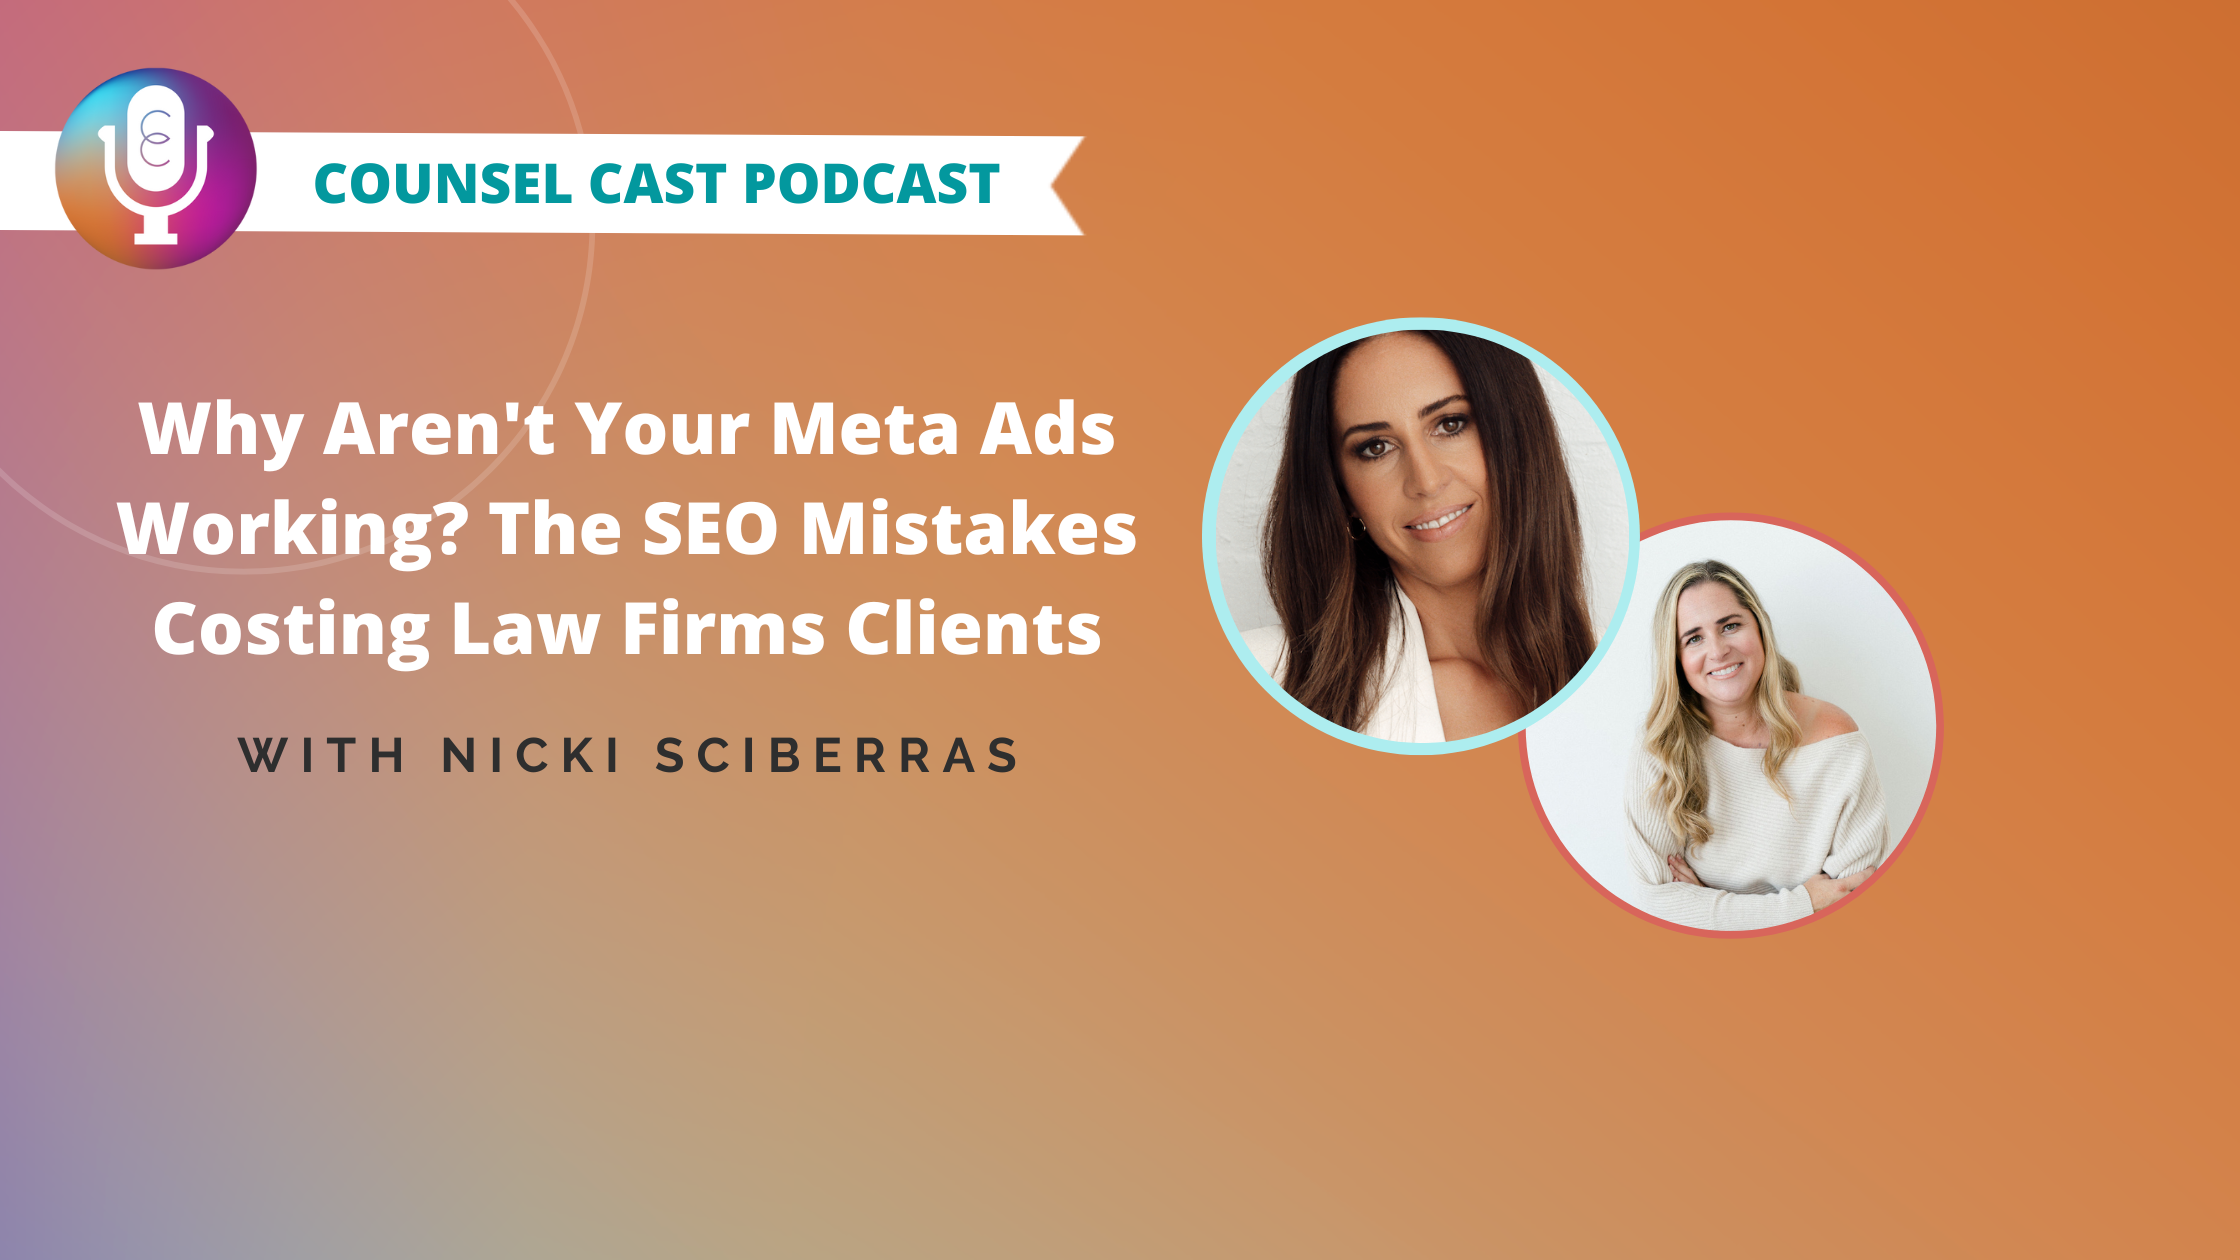 Why Aren't Your Meta Ads Working? The SEO Mistakes Costing Law Firms Clients with Nicki Sciberras